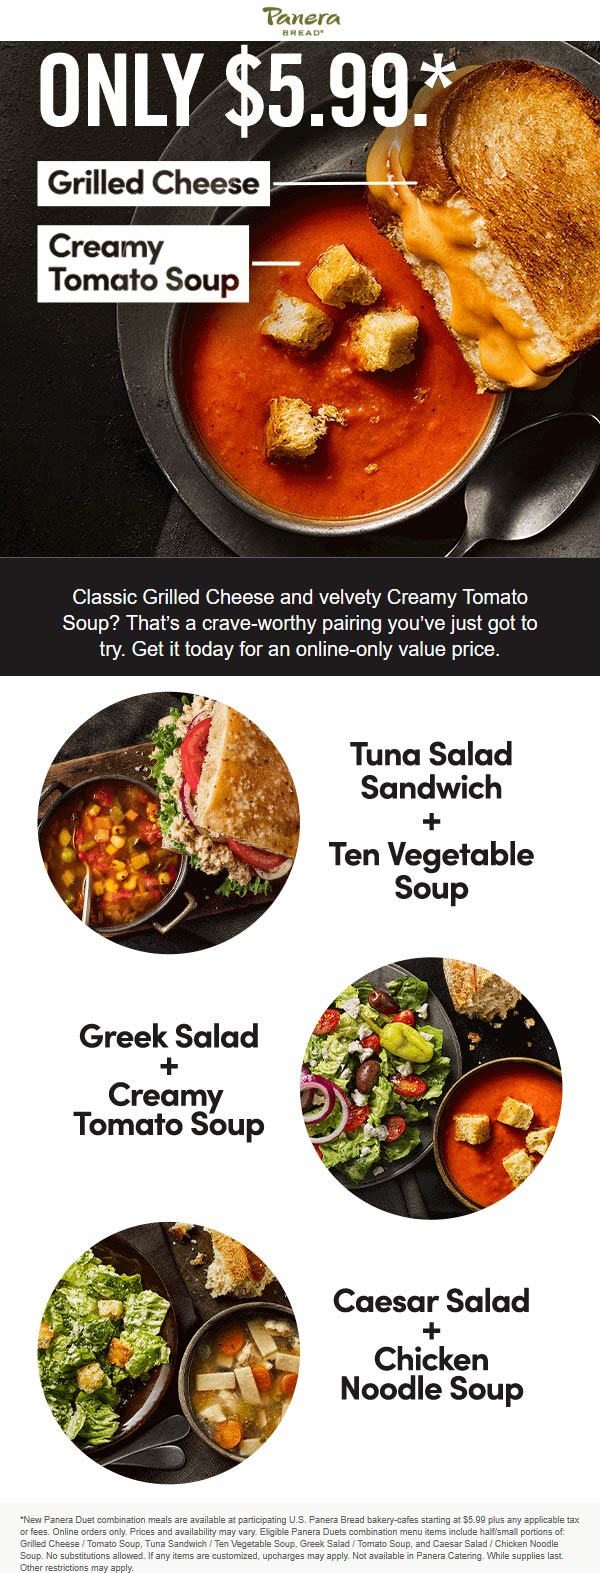 Panera Bread restaurants Coupon  Grilled cheese + tomato soup = $6 at Panera Bread, other duets also available #panerabread 